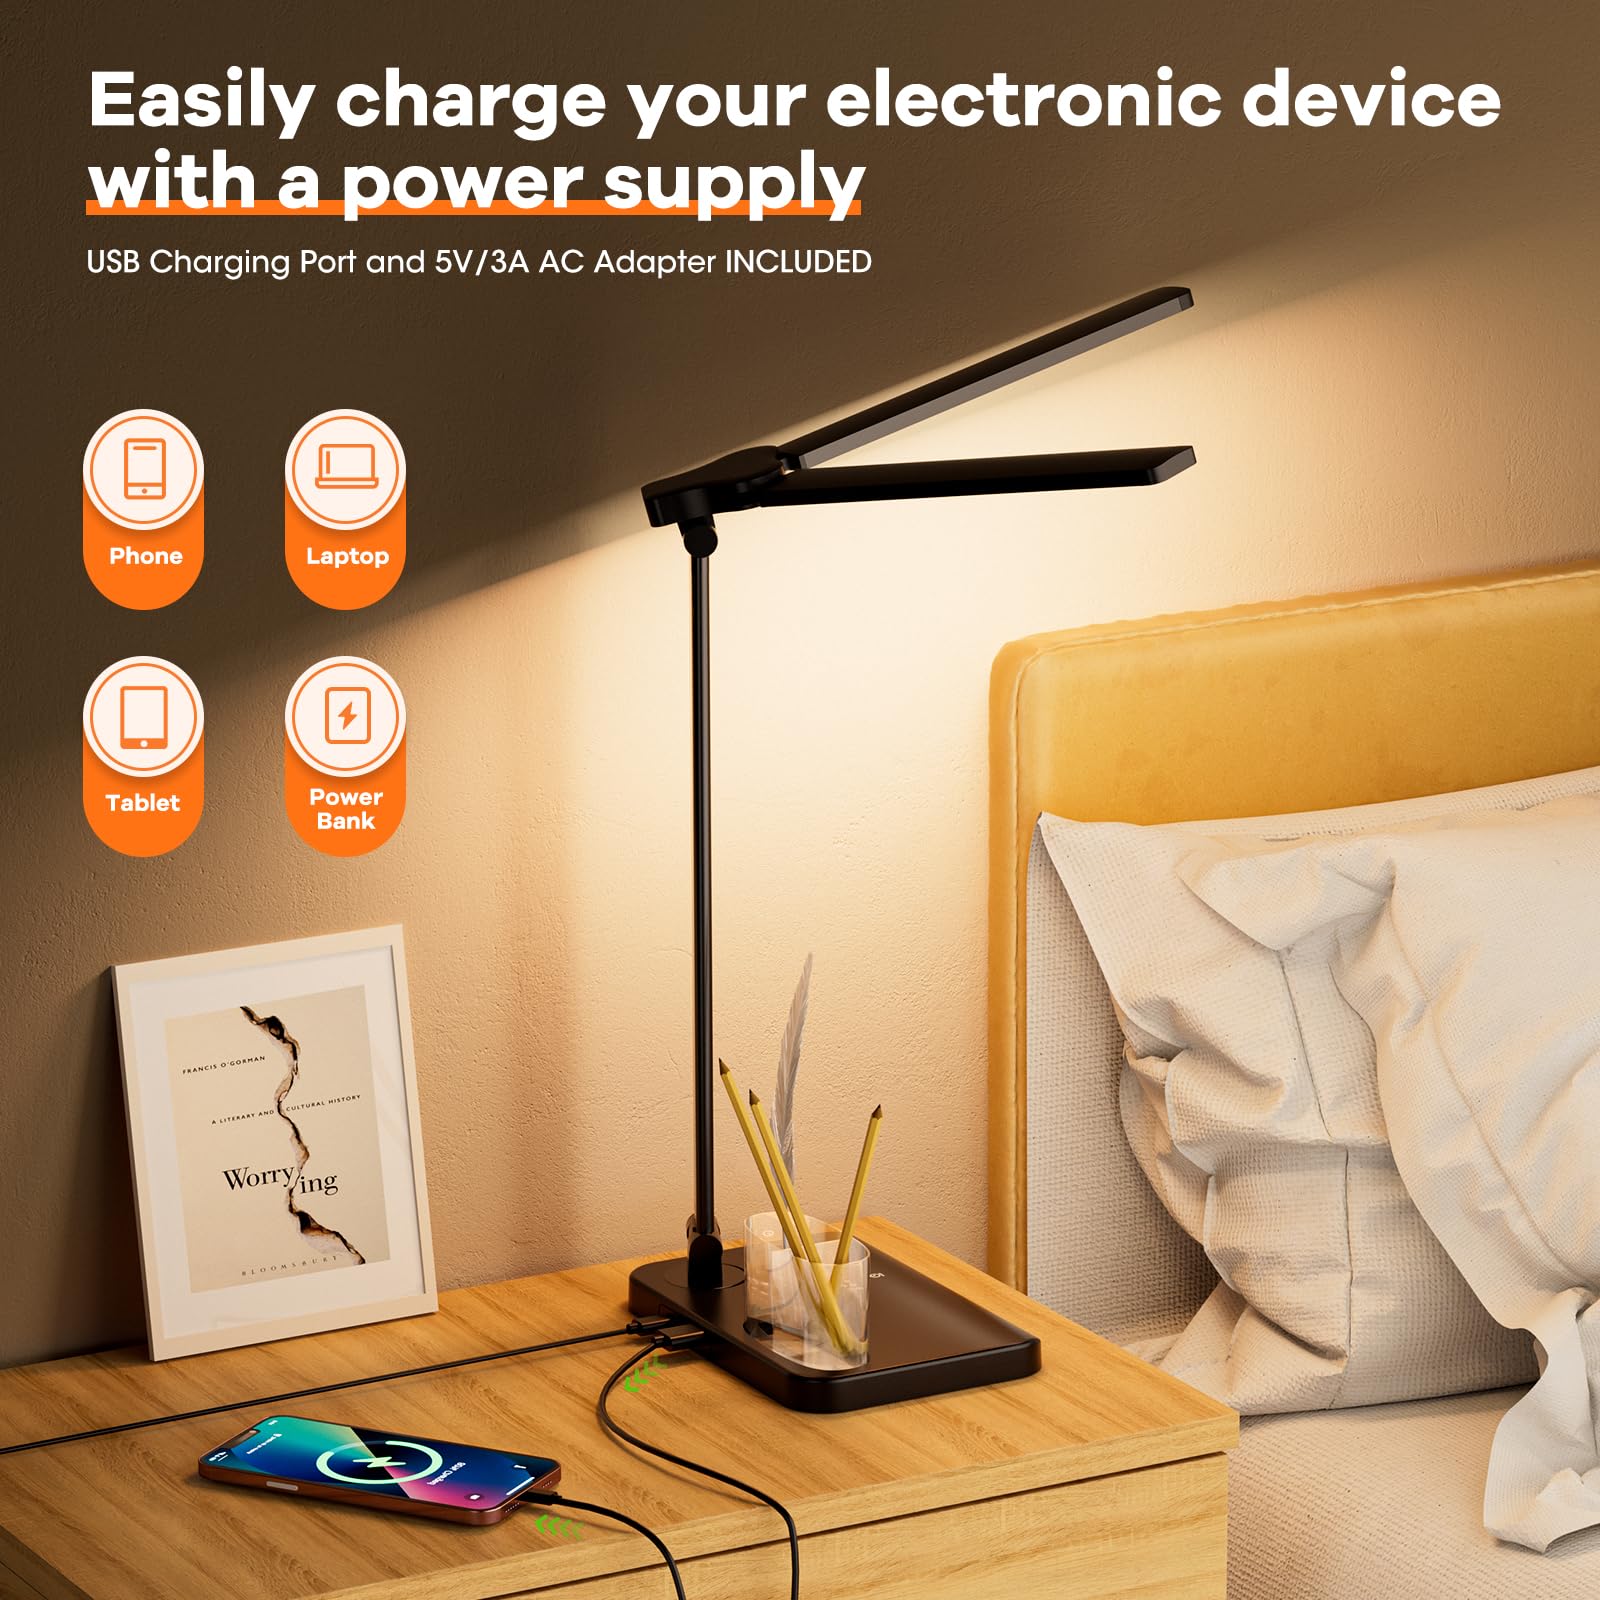 RealPlus Desk Lamp with USB Charging Port & 【Adapter】, 17IN Tall LED Desk Lamps for Home Office, 10W Double Head Desk Lamp with Pen Holder, Memory Function/10 Brightness/5 Colors/Reading Mode/Timer